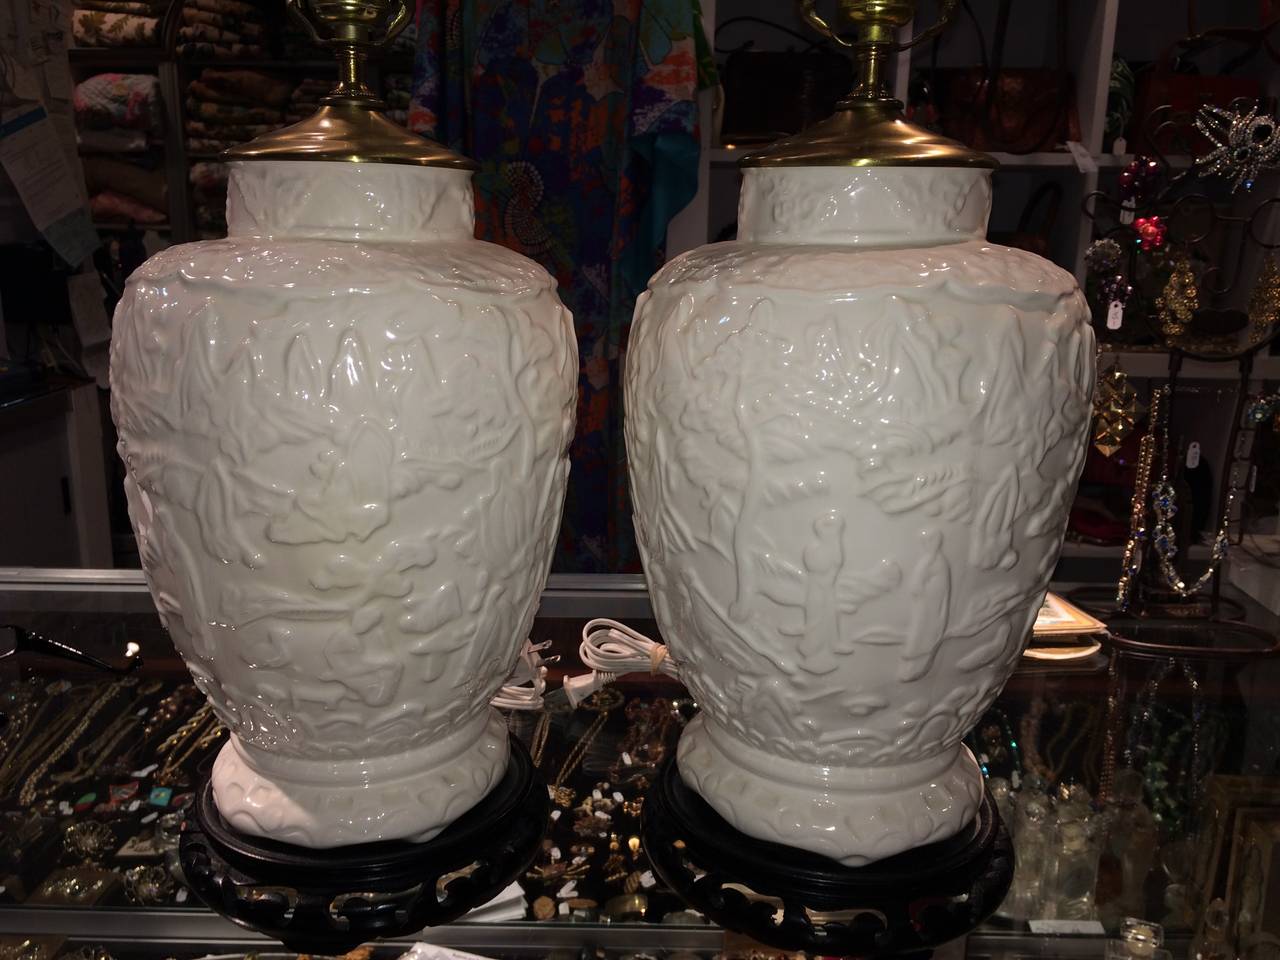 Pair of white embossed Chinese Chippendale ceramic lamps. These would go great in any traditional home or with any Dorothy Draper style decor. Teak wood carved bases.